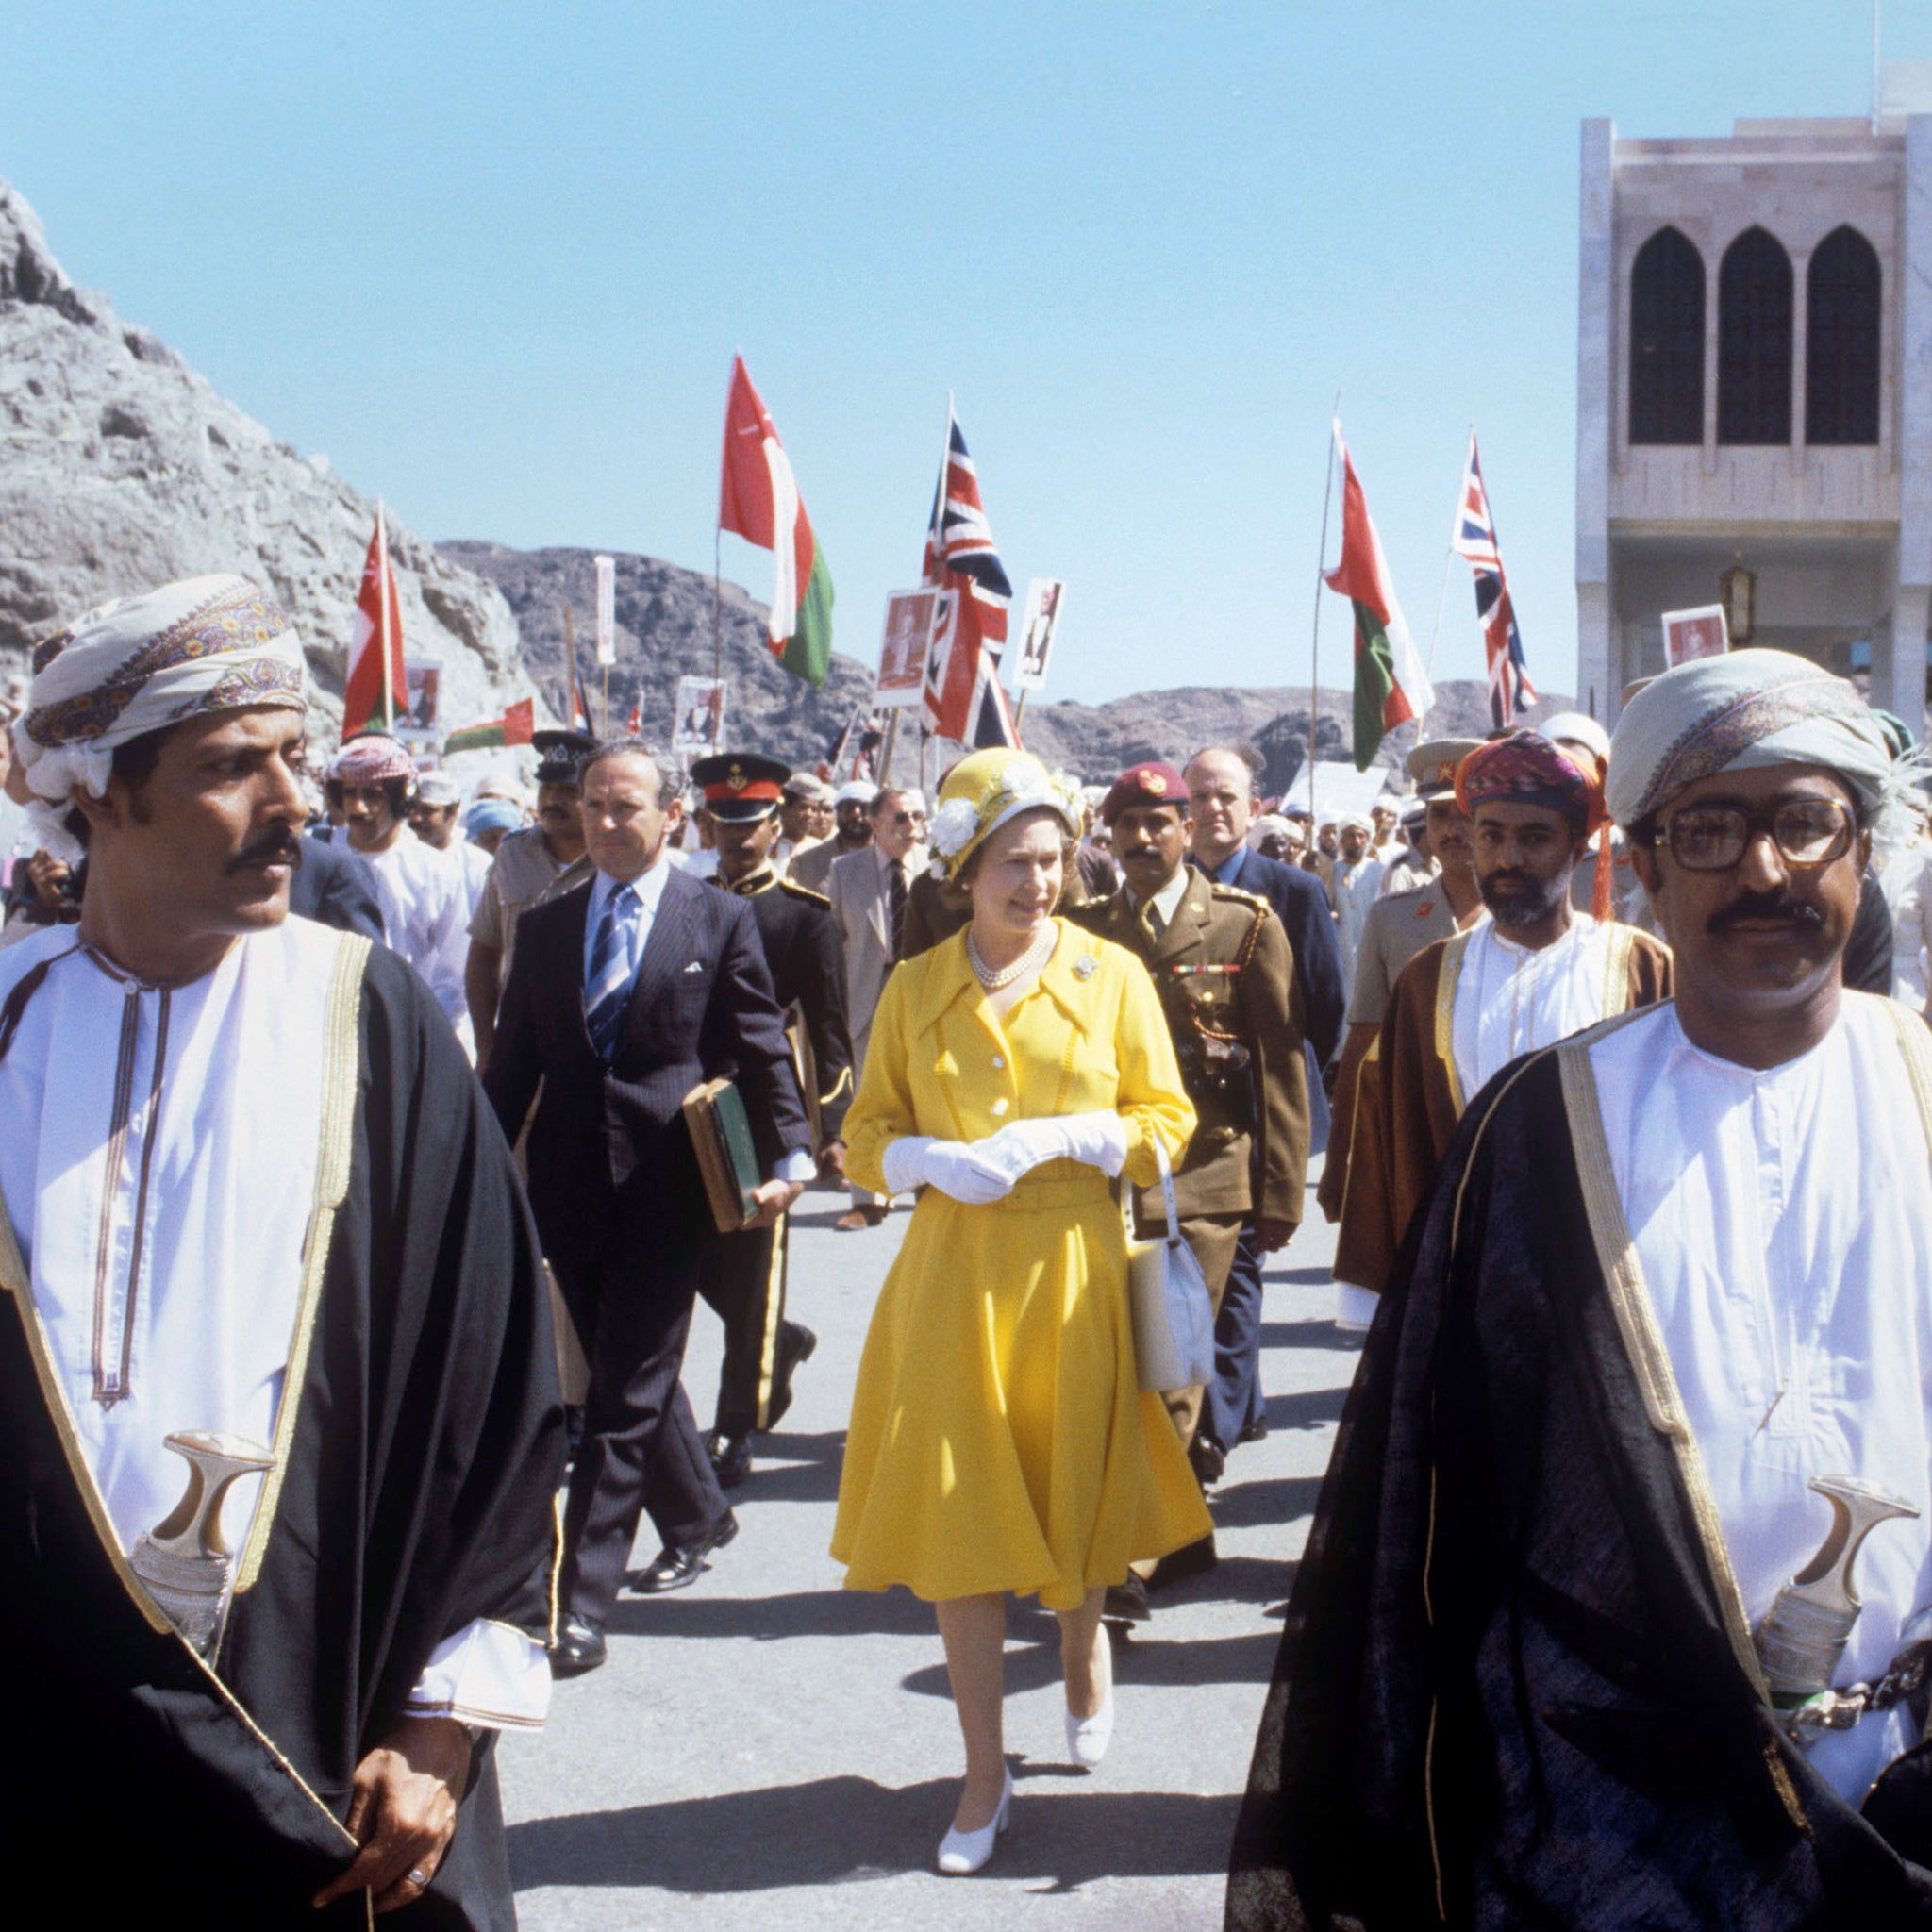 Queen Elizabeth II during a walkabout in Muscat while visiting Oman, 1979